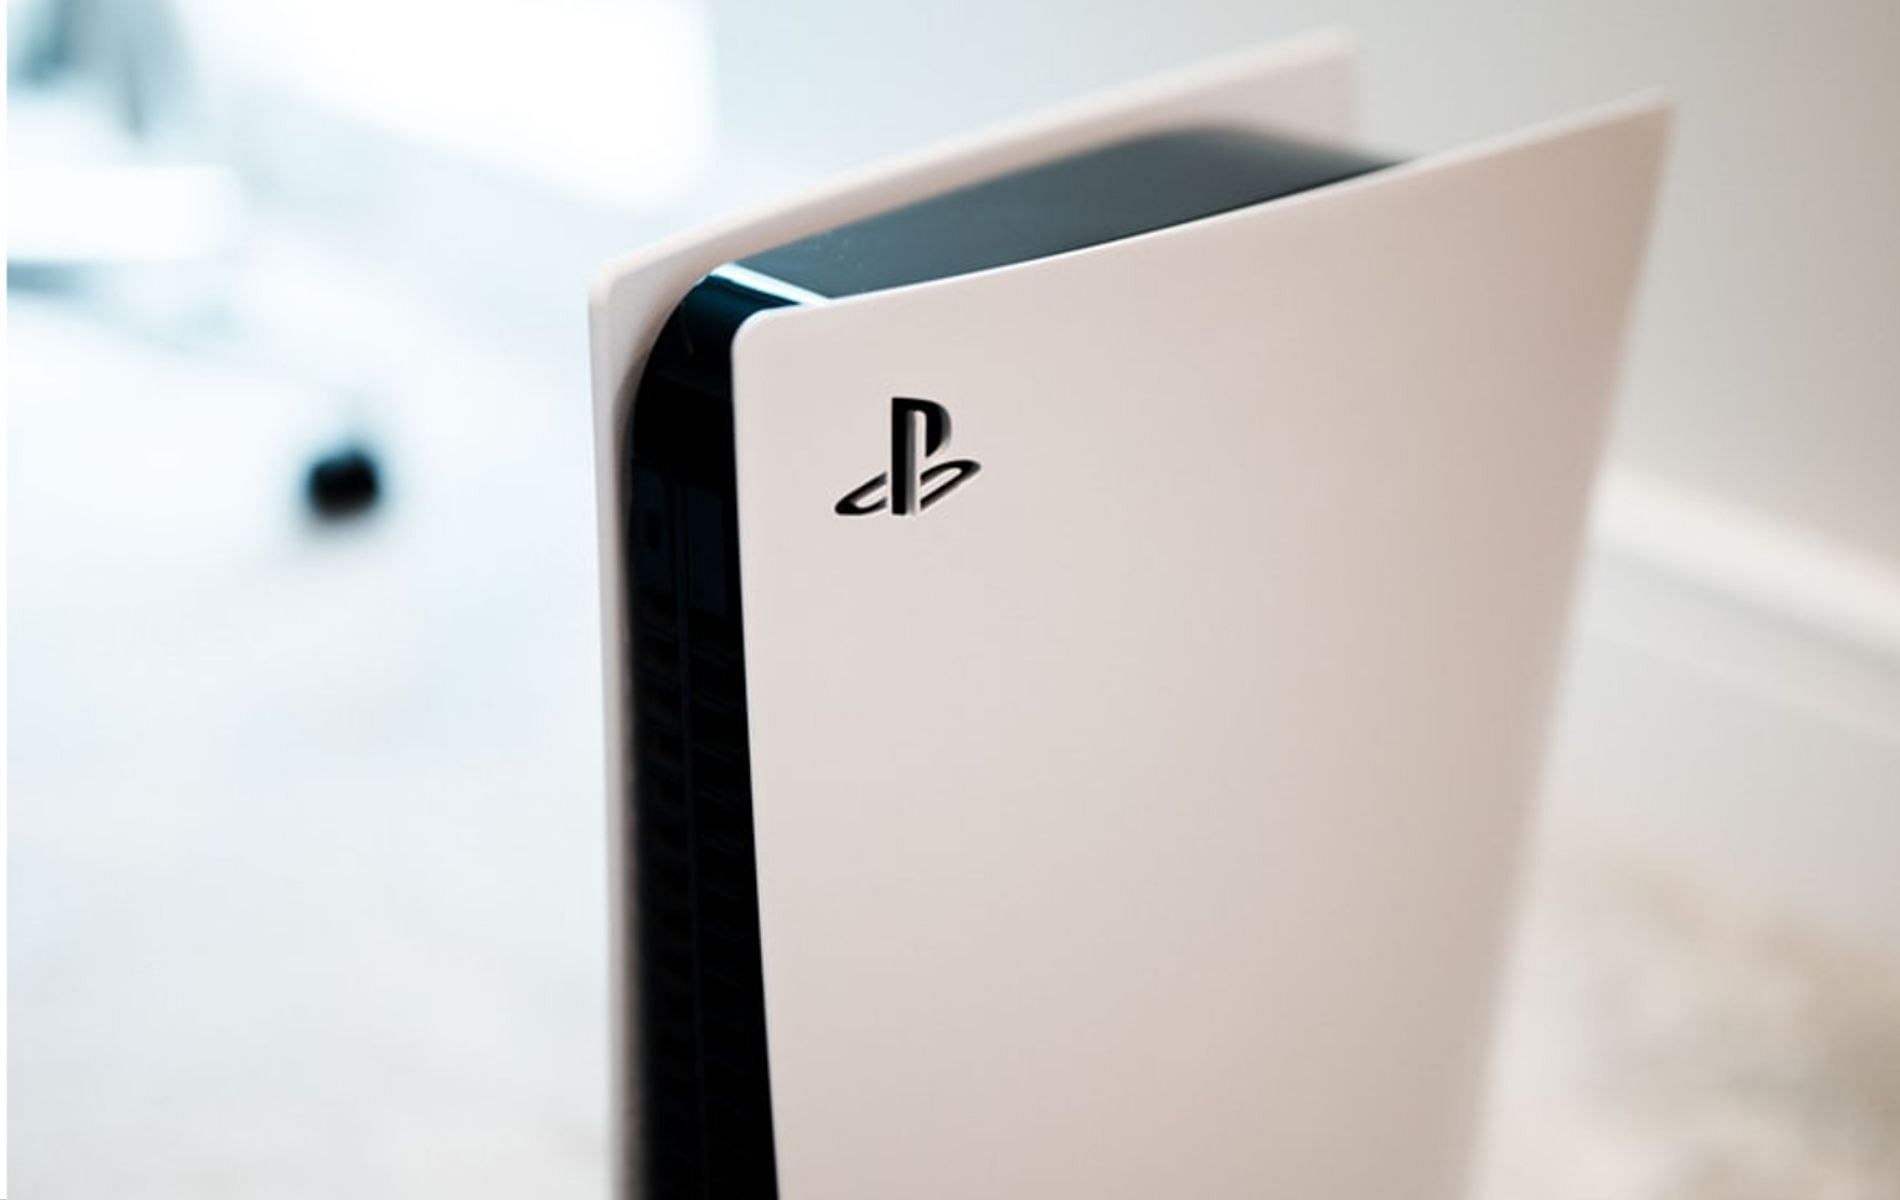 PlayStation 5 Pro Specs Surface Online Including 8 Core, Custom